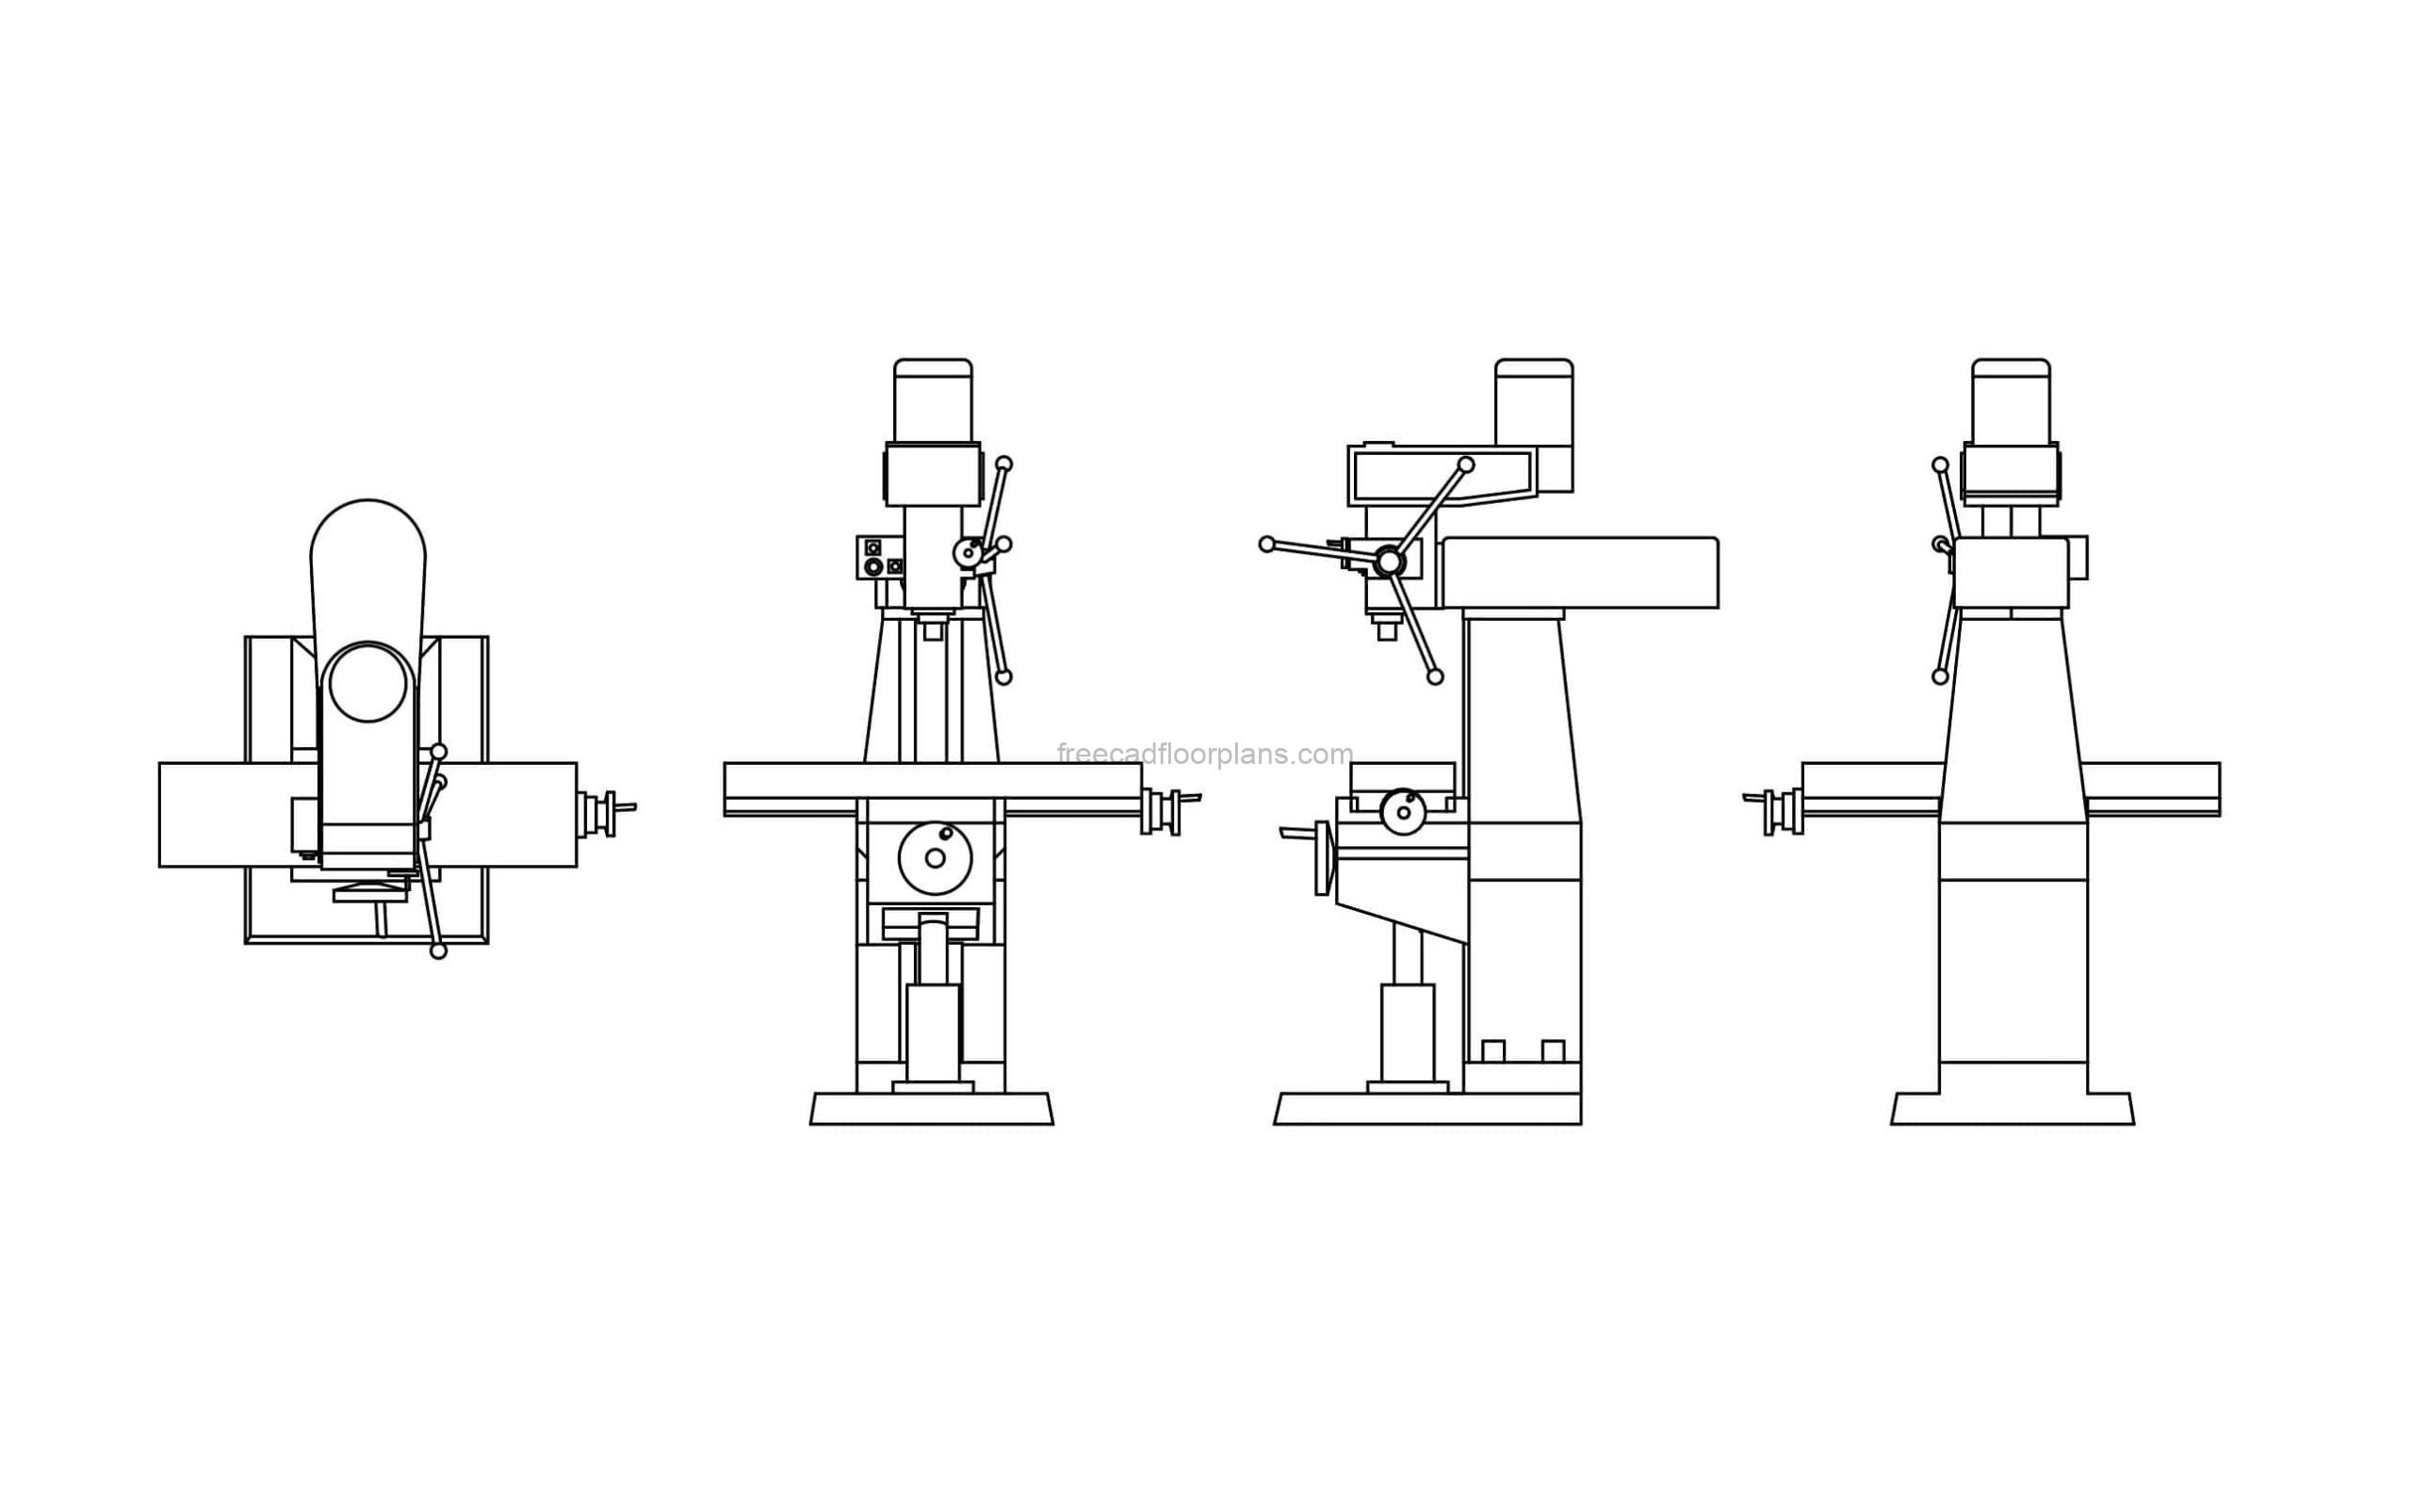 millin machine drawing in dwg CAD format all 2d views including plan, for free download